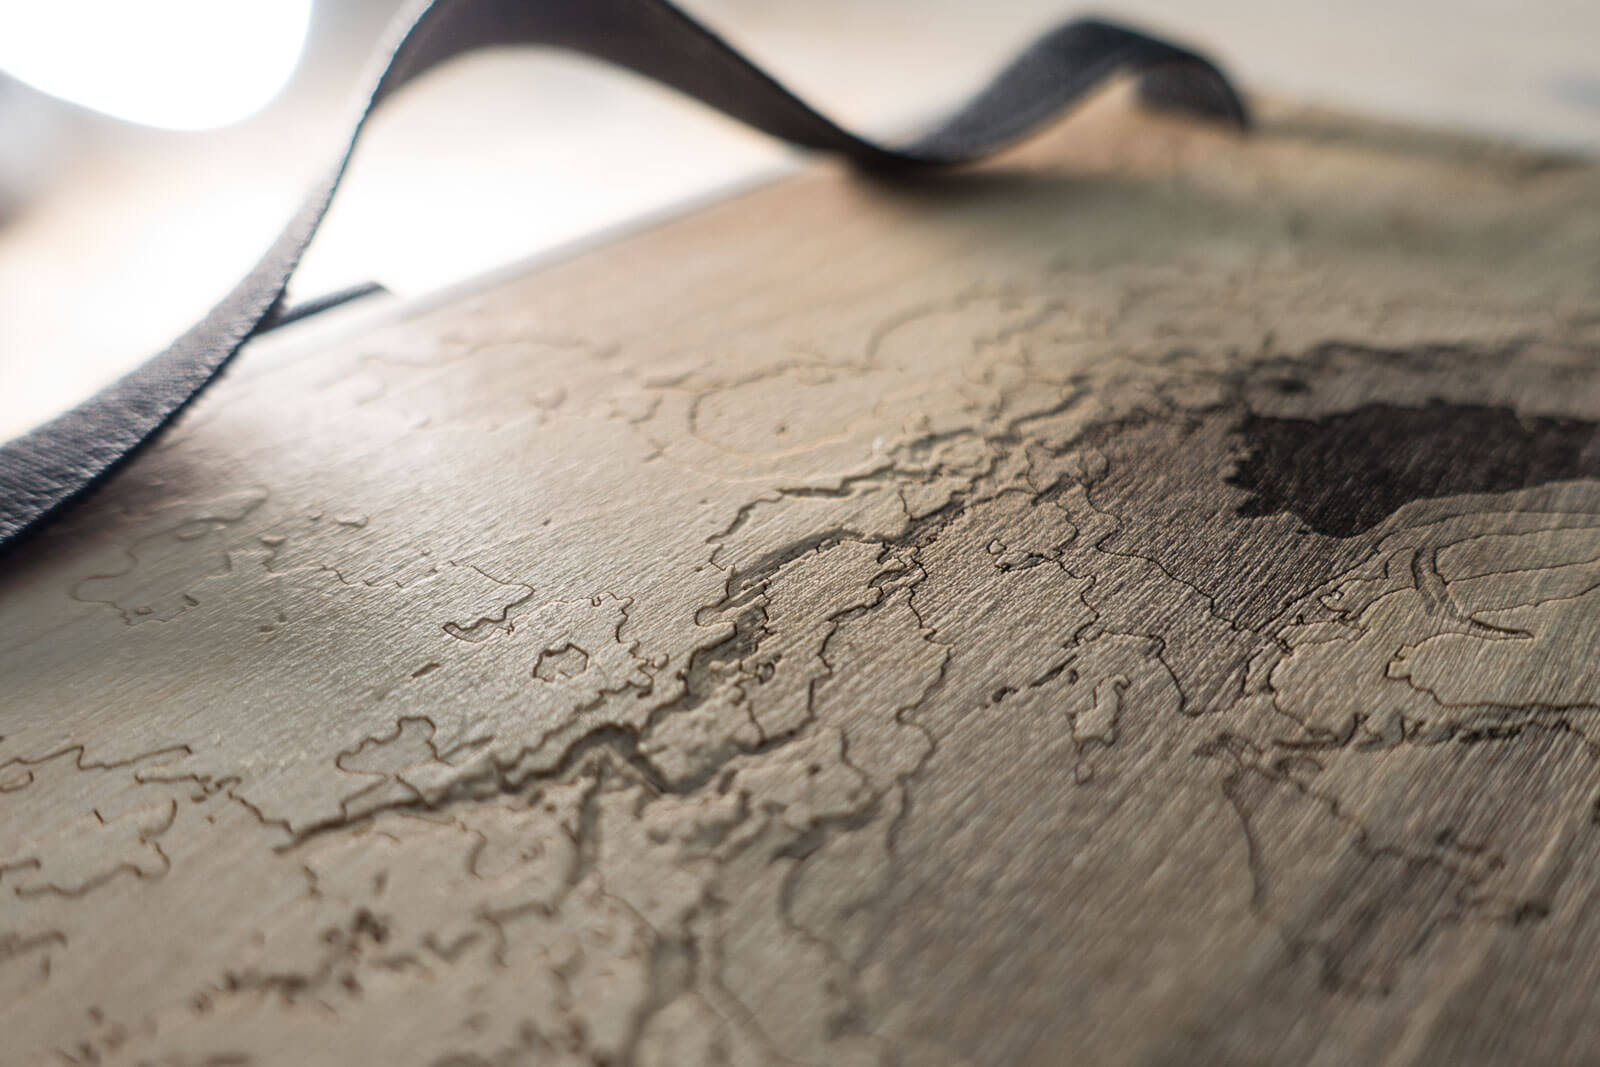 Lasercut Mars Sketchbook - Engraved topography of Gale crater on Mars by Robin Hanhart